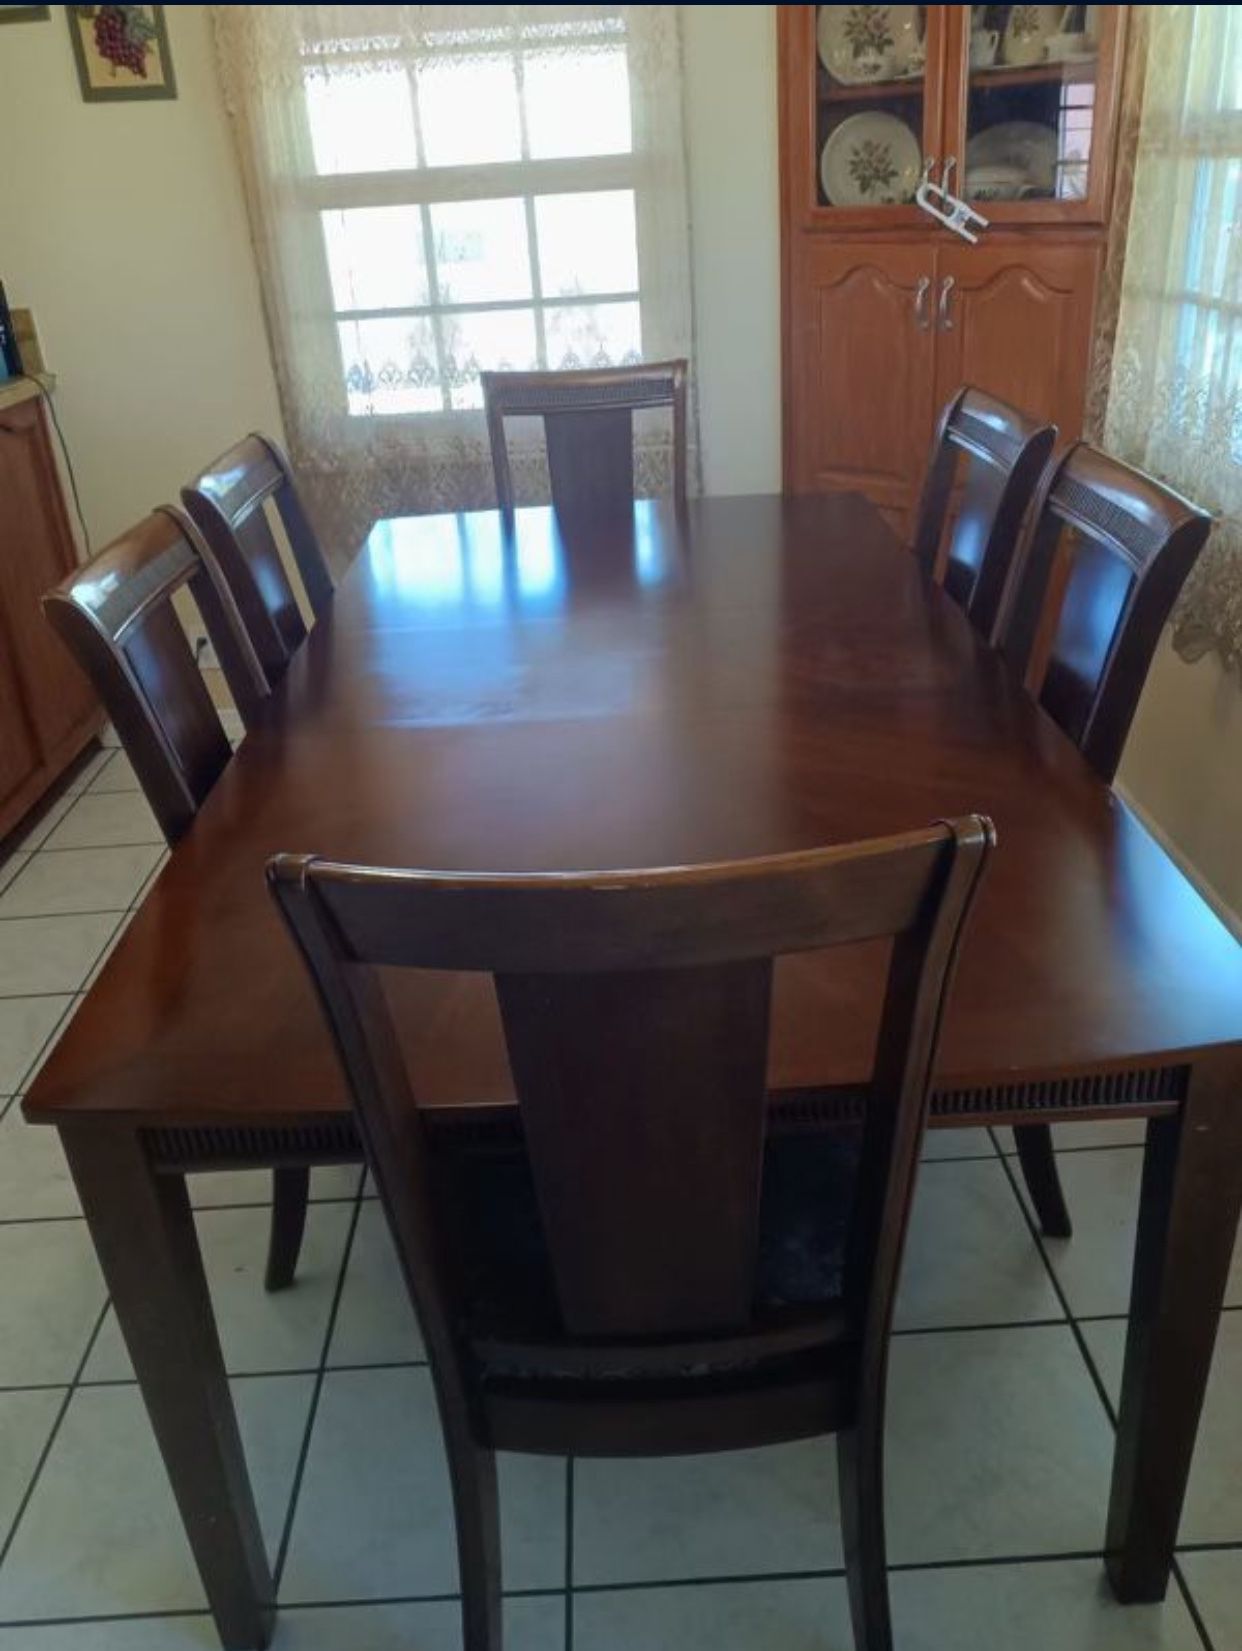 Wooden Dining Room Table Set